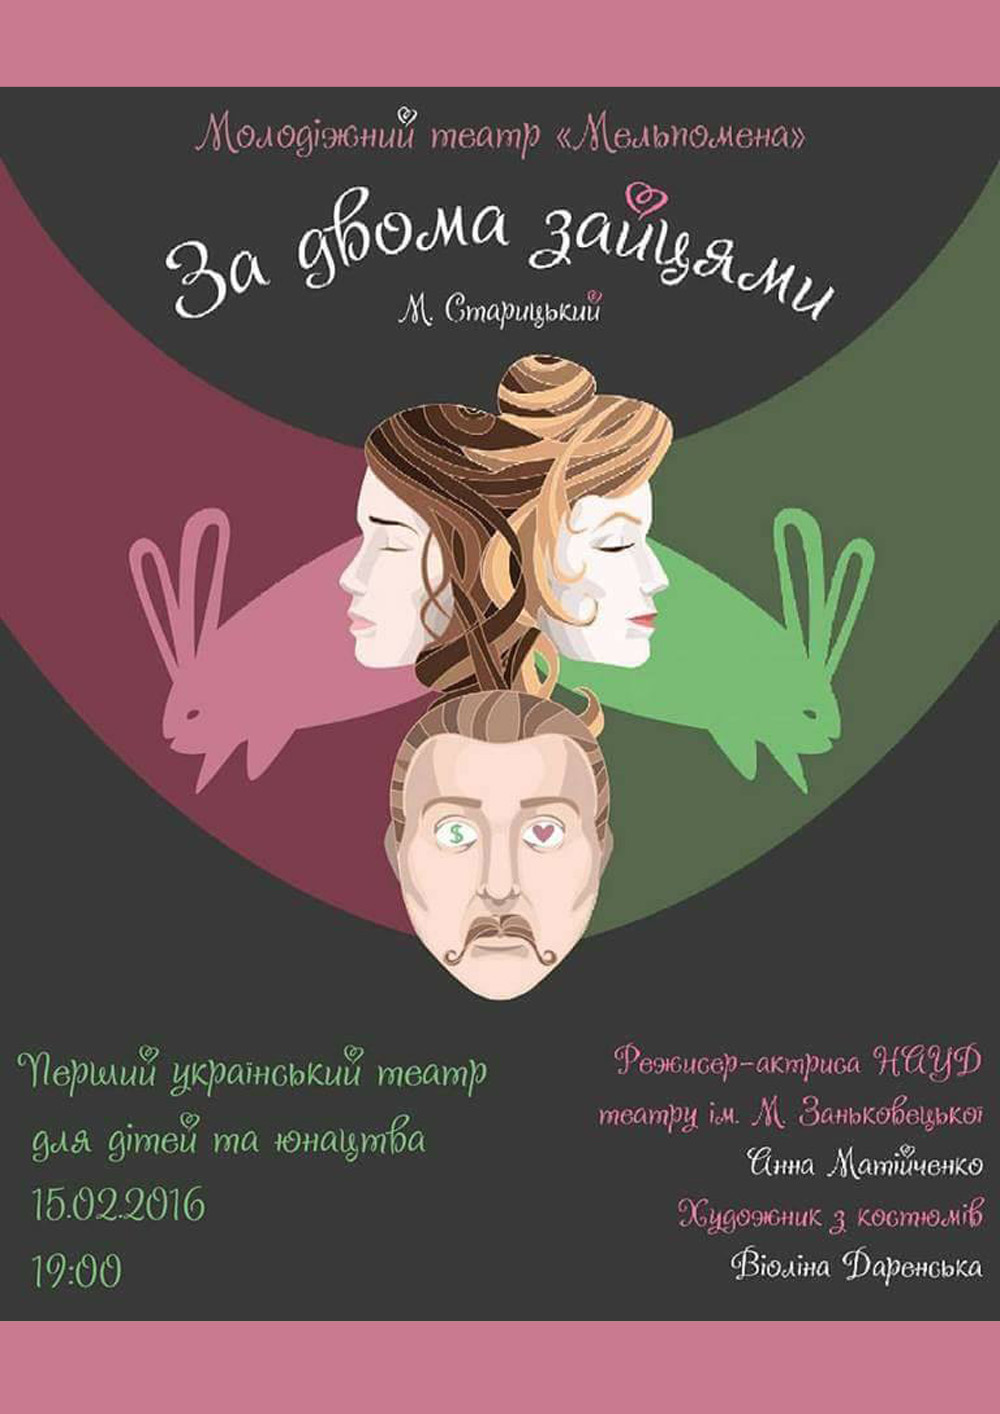 First Ukrainian Theatre for Children and Youth